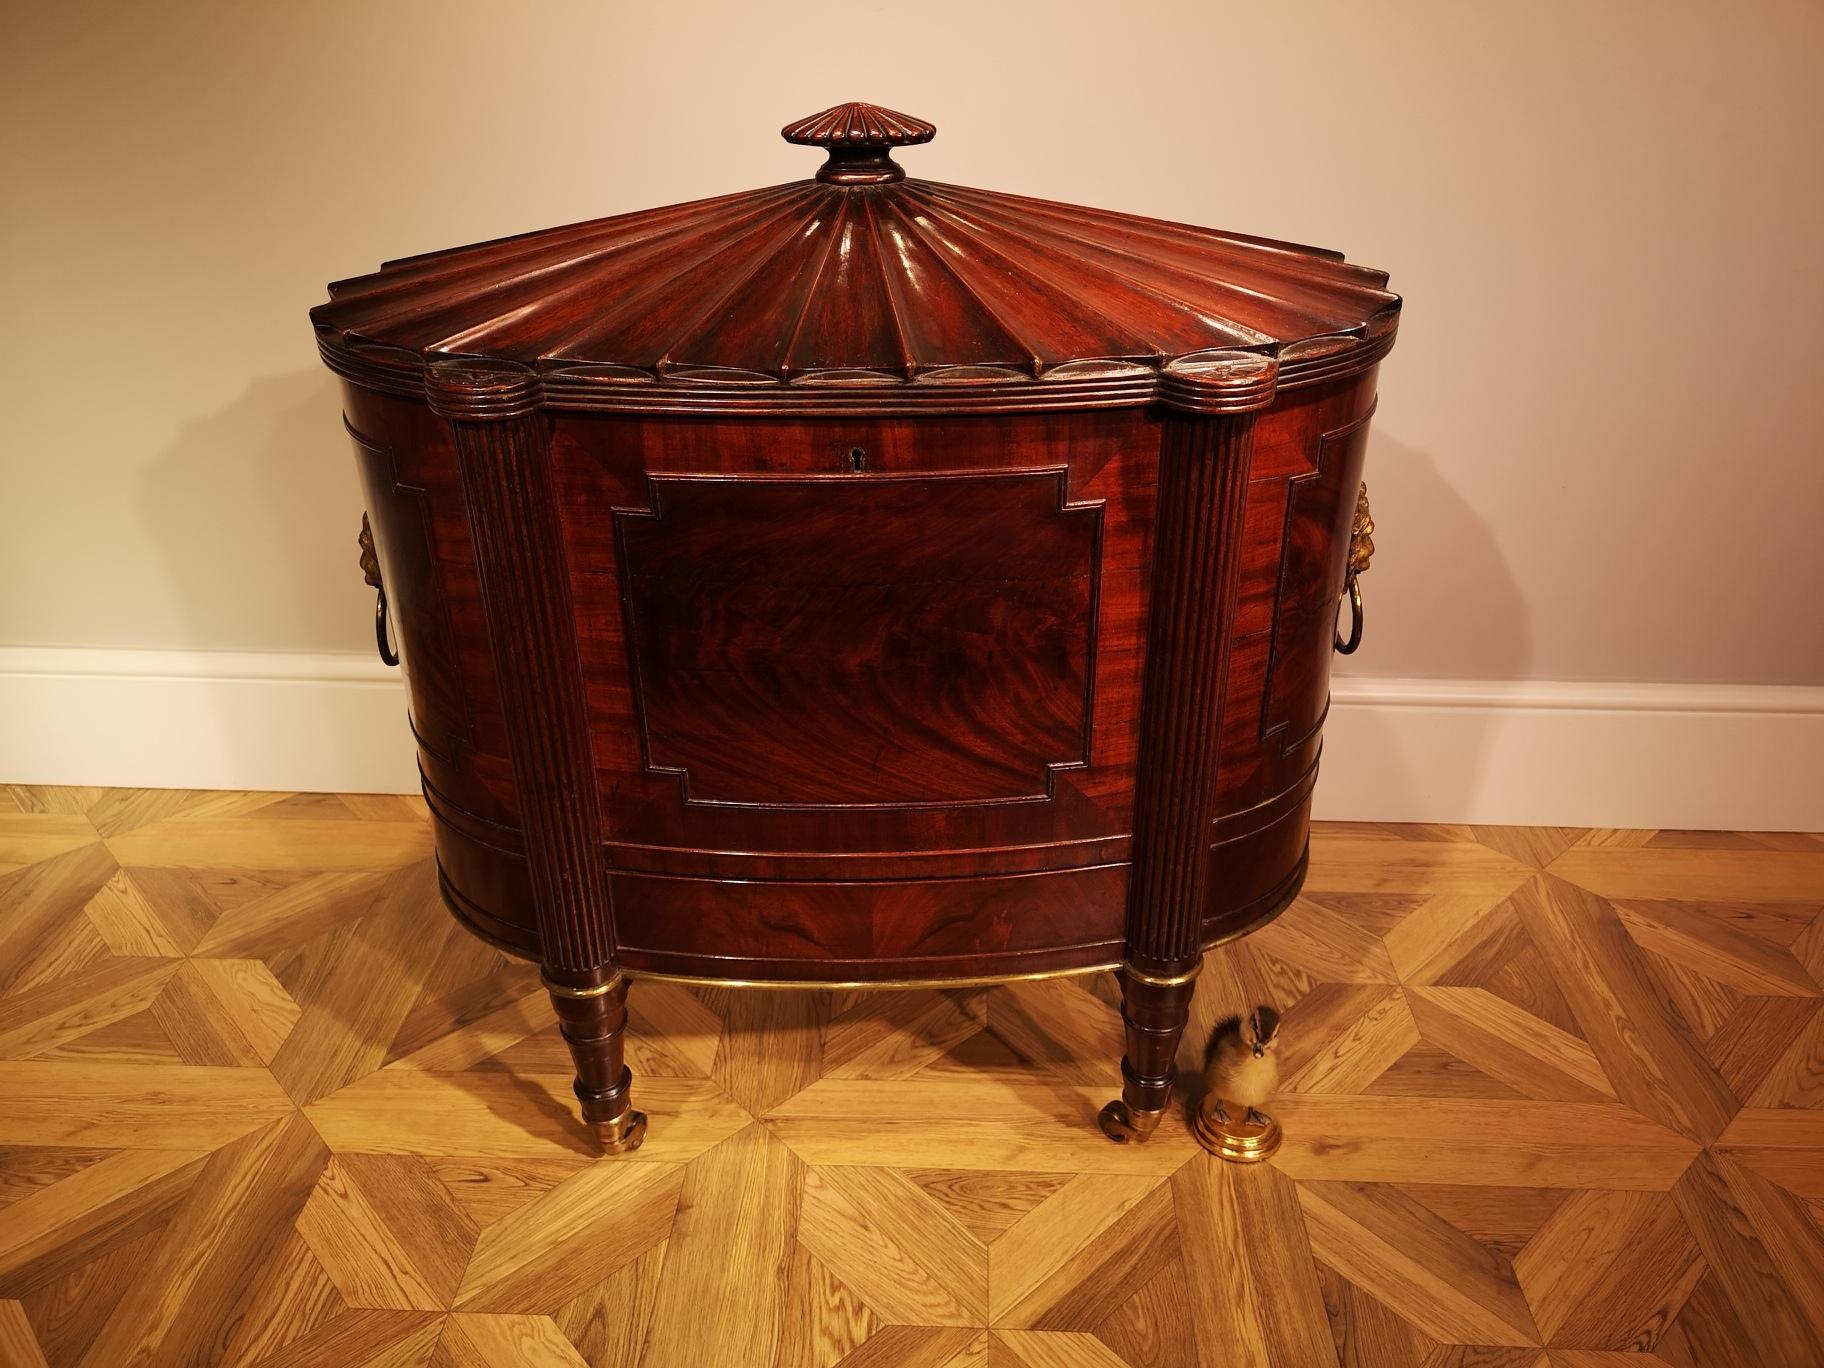 An exceptional George III mahogany cellaret of oval form with a superb radially fluted hinged lid centred by a stylised fluted finial,  edged by a reeded border with inset carved paterae to the top of the four projecting reeded columns, the whole